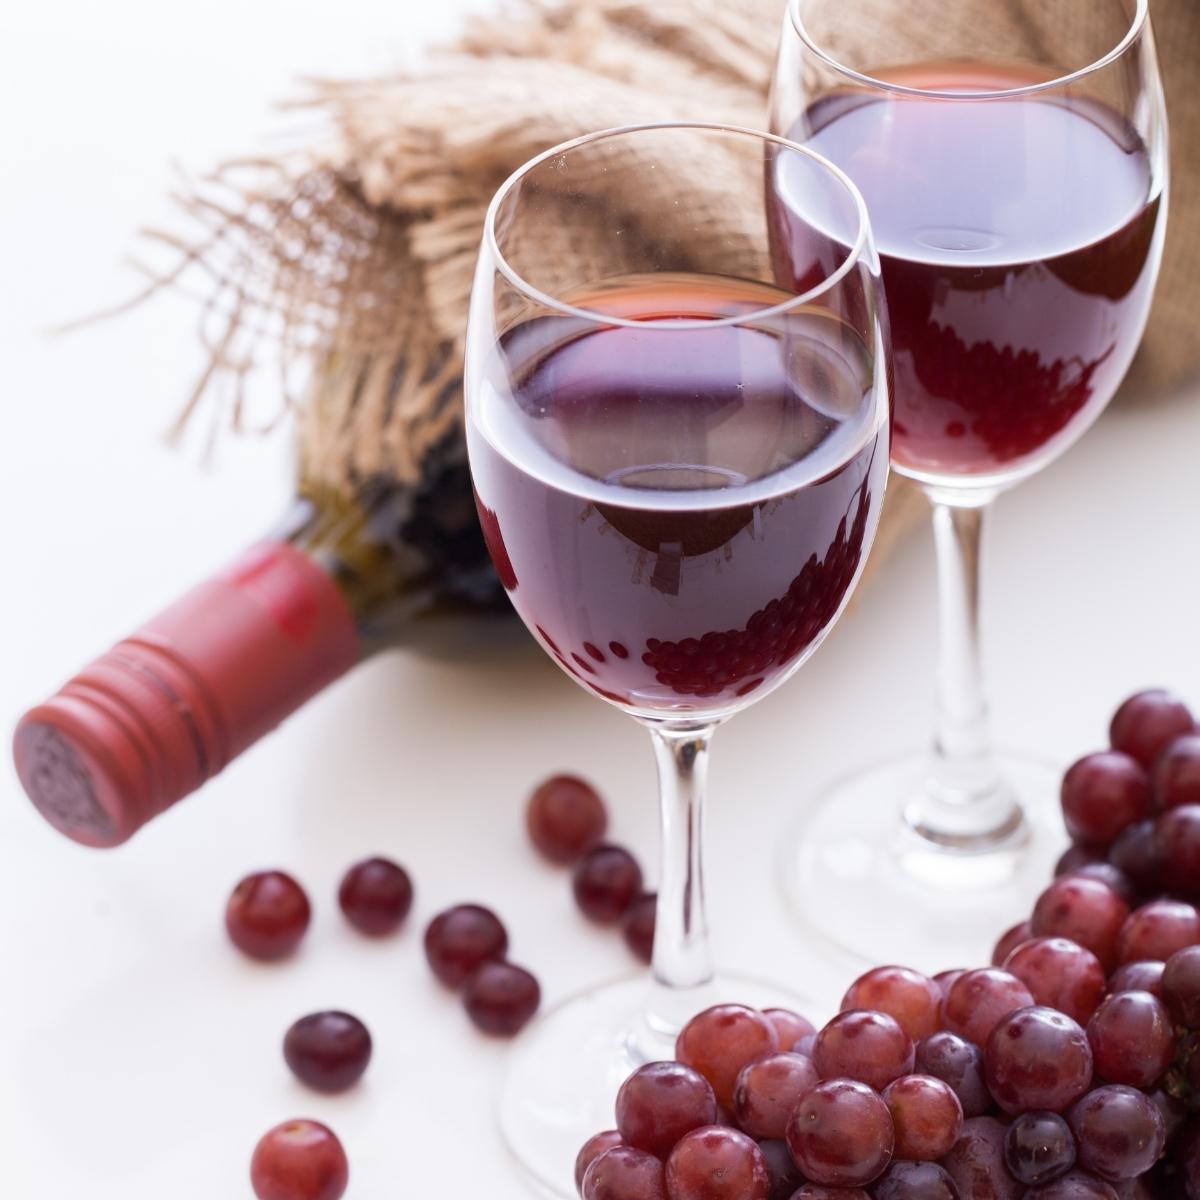 The Best Non-Alcoholic Red Wine 2023 - The Mindful Mocktail